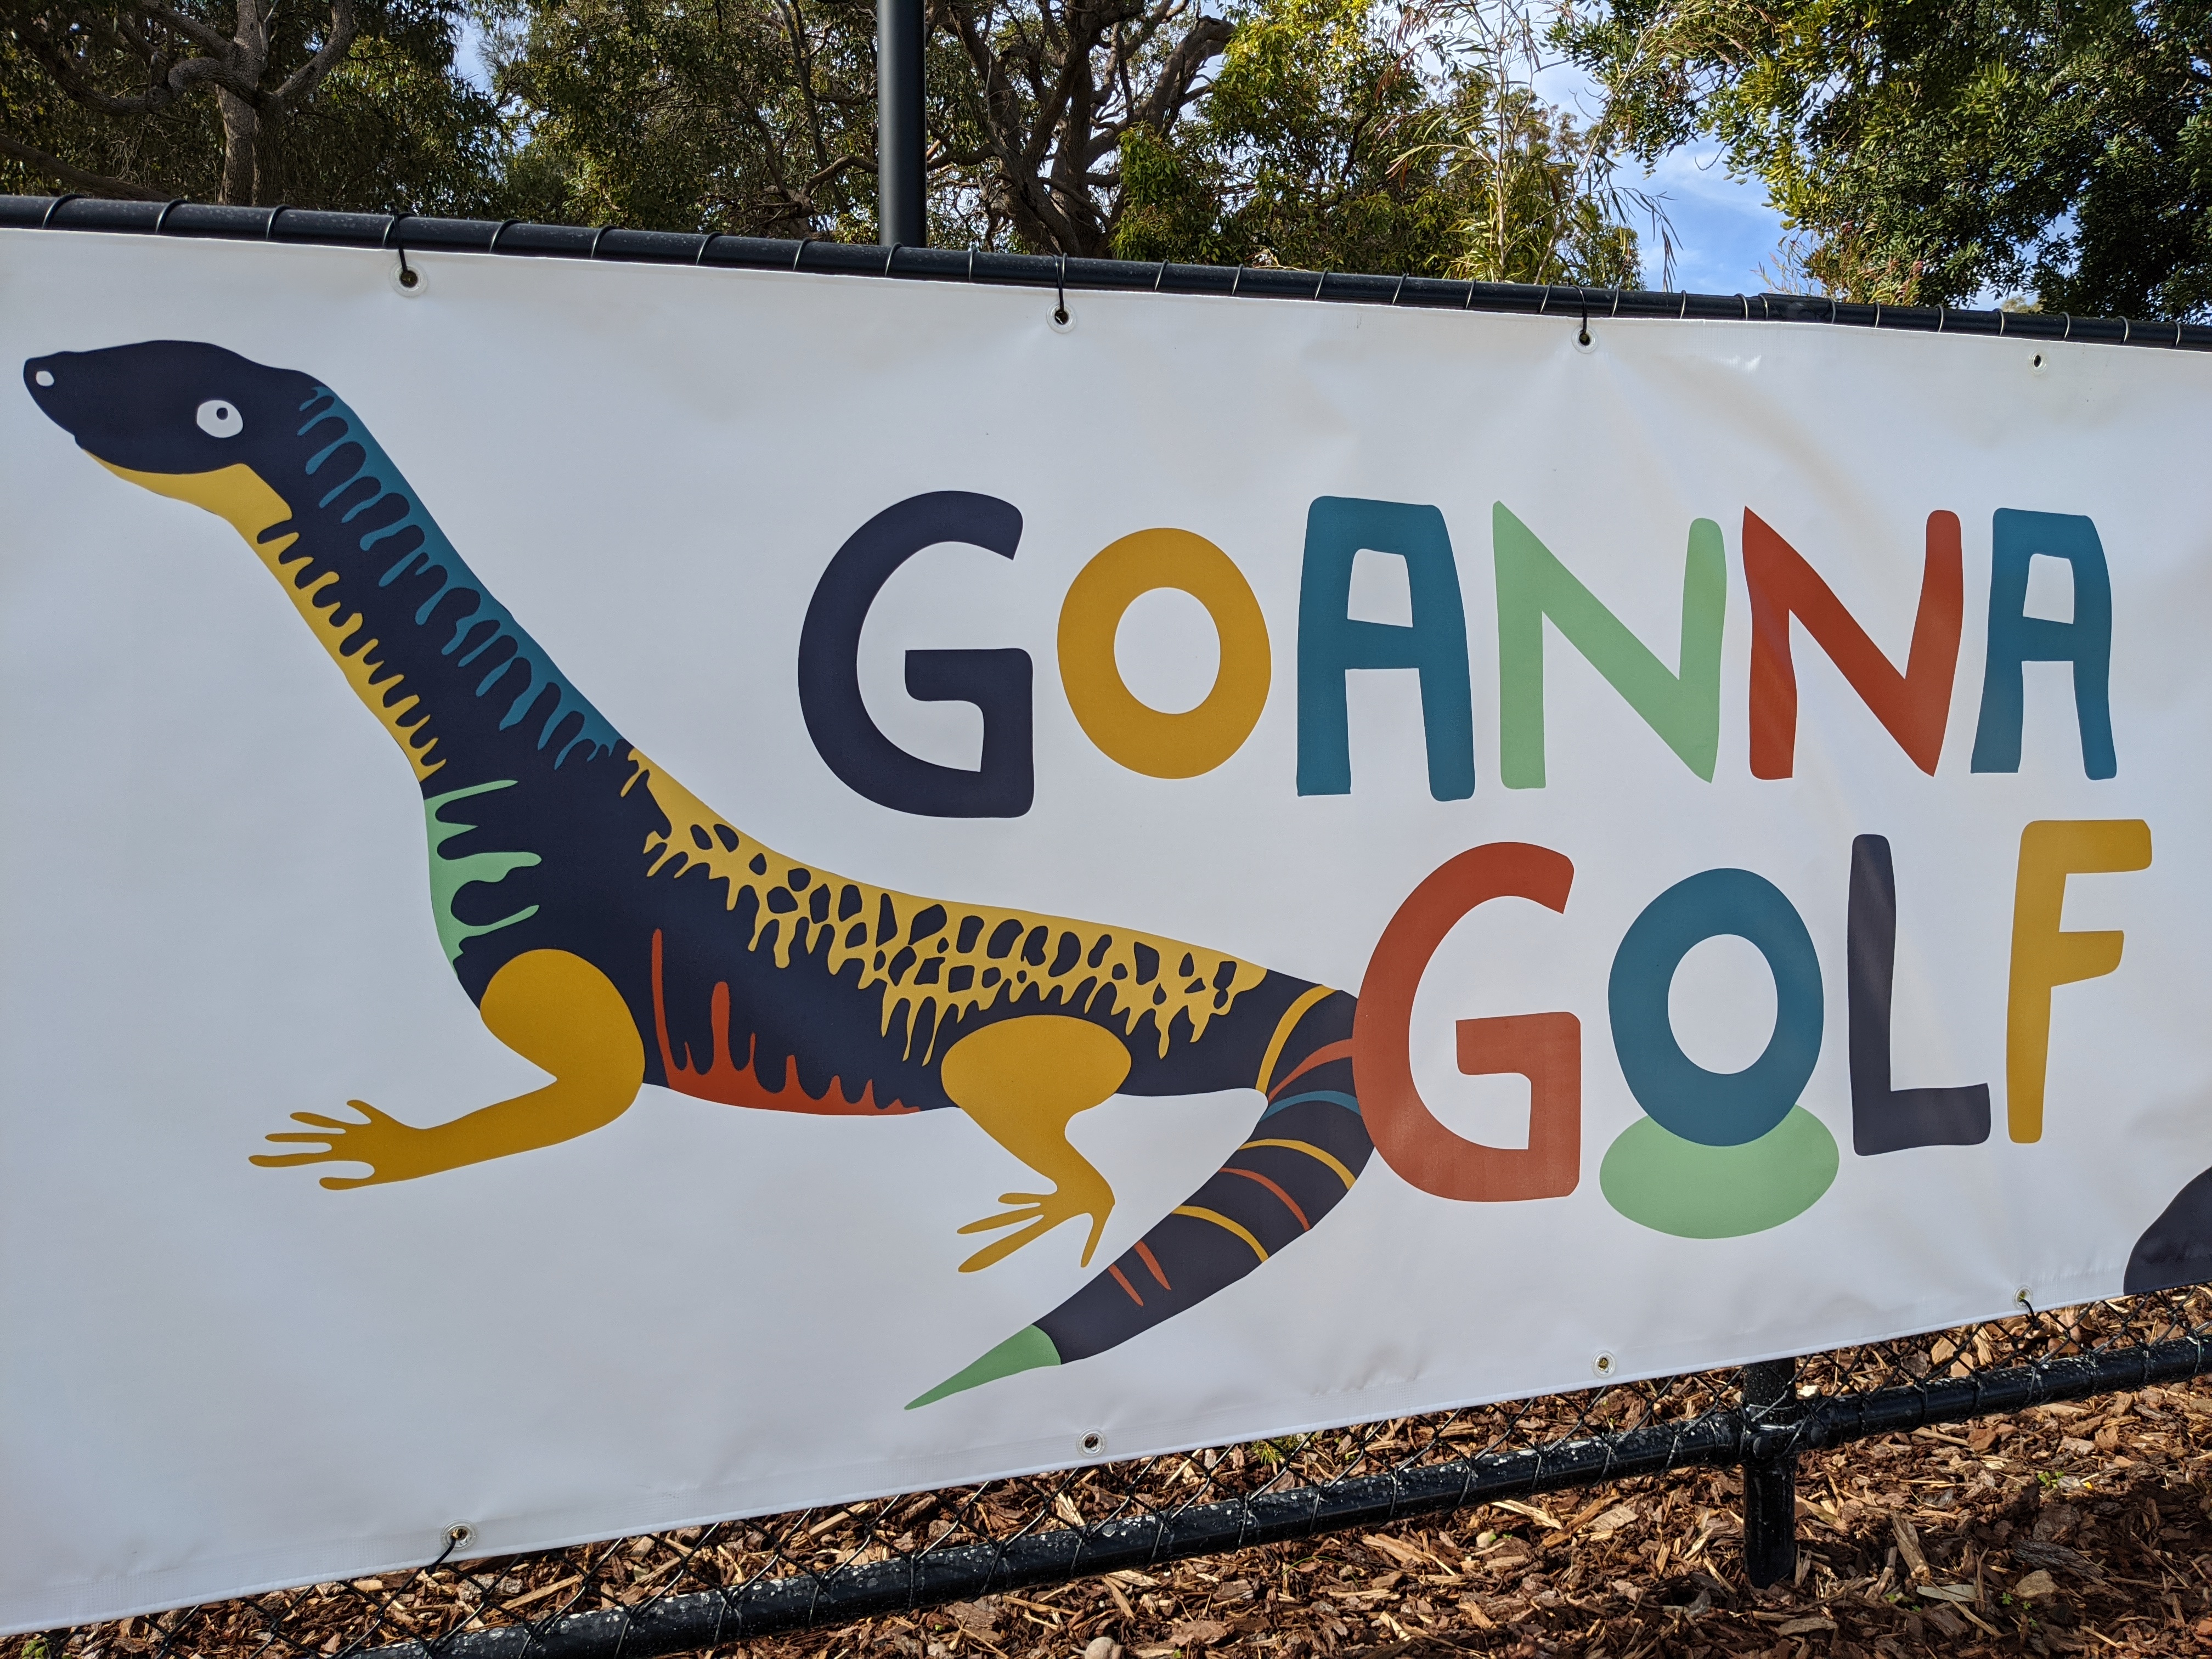 Enjoy a round of family mini golf at the serene Point Walter Golf Course at the fun Goanna Golf Bicton